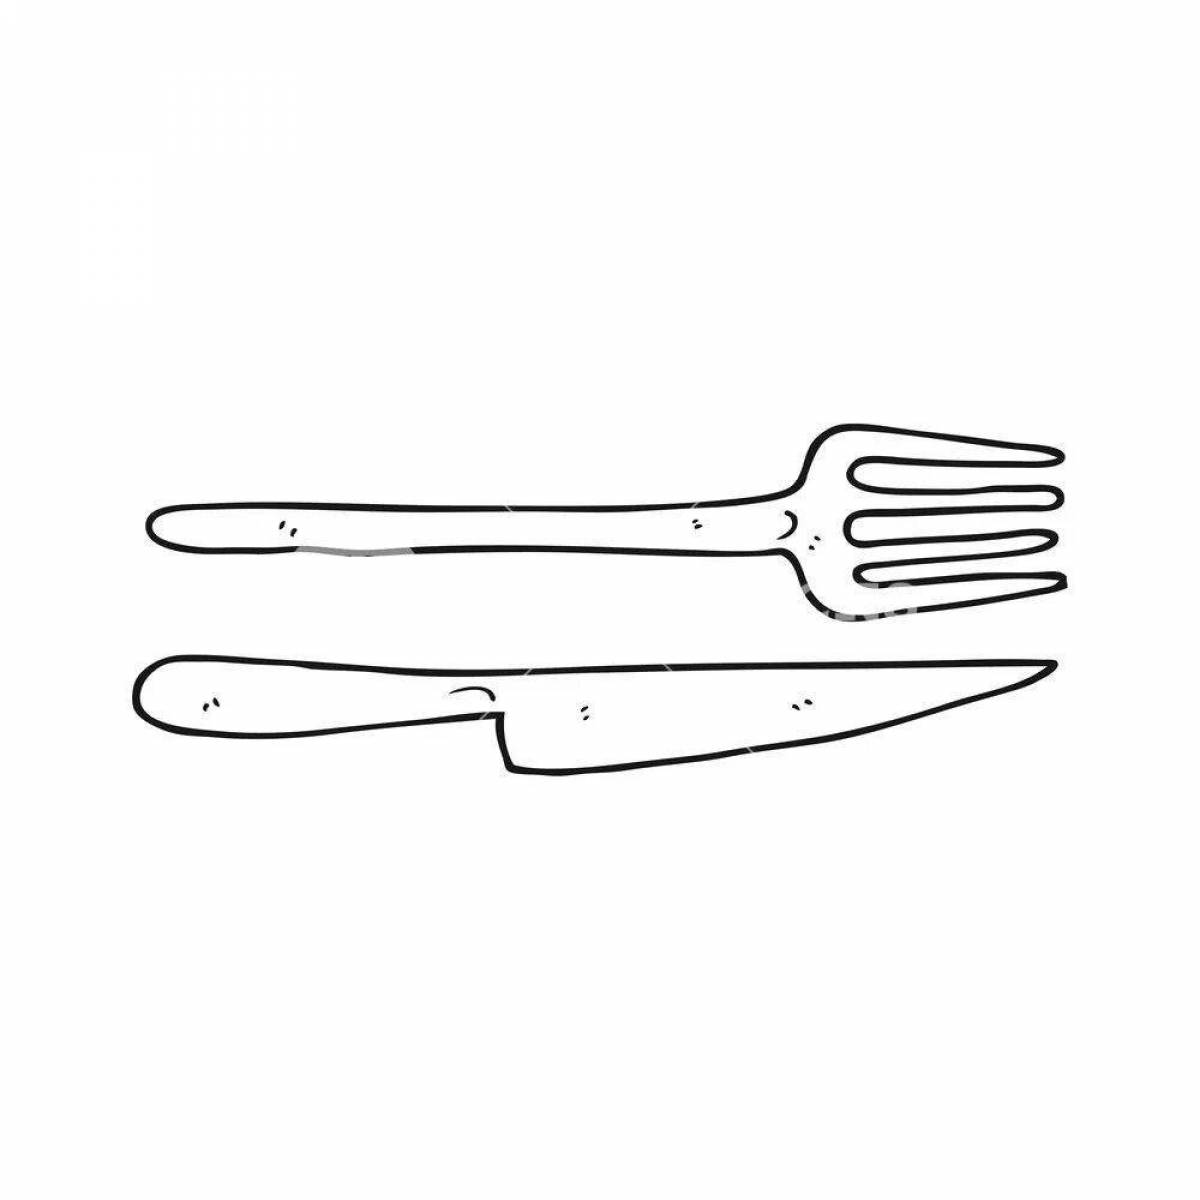 Coloring fork for the little ones